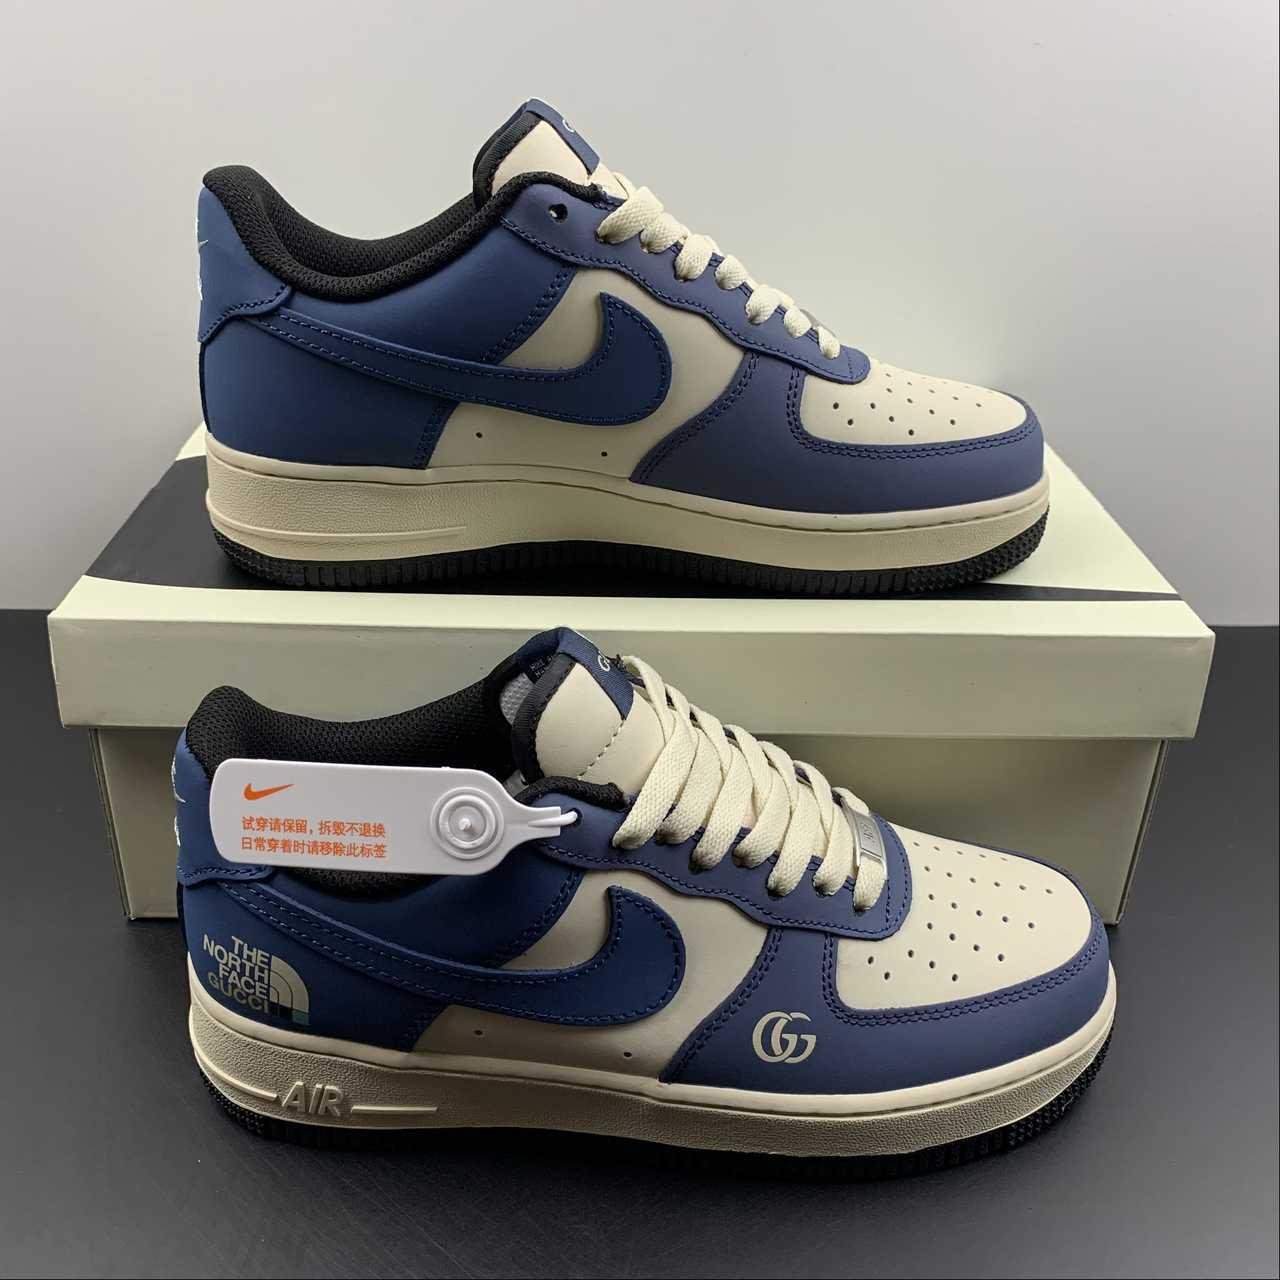      SHOES AIR FORCE 1 Air Force Low Top Casual Board Shoes BS9055-305